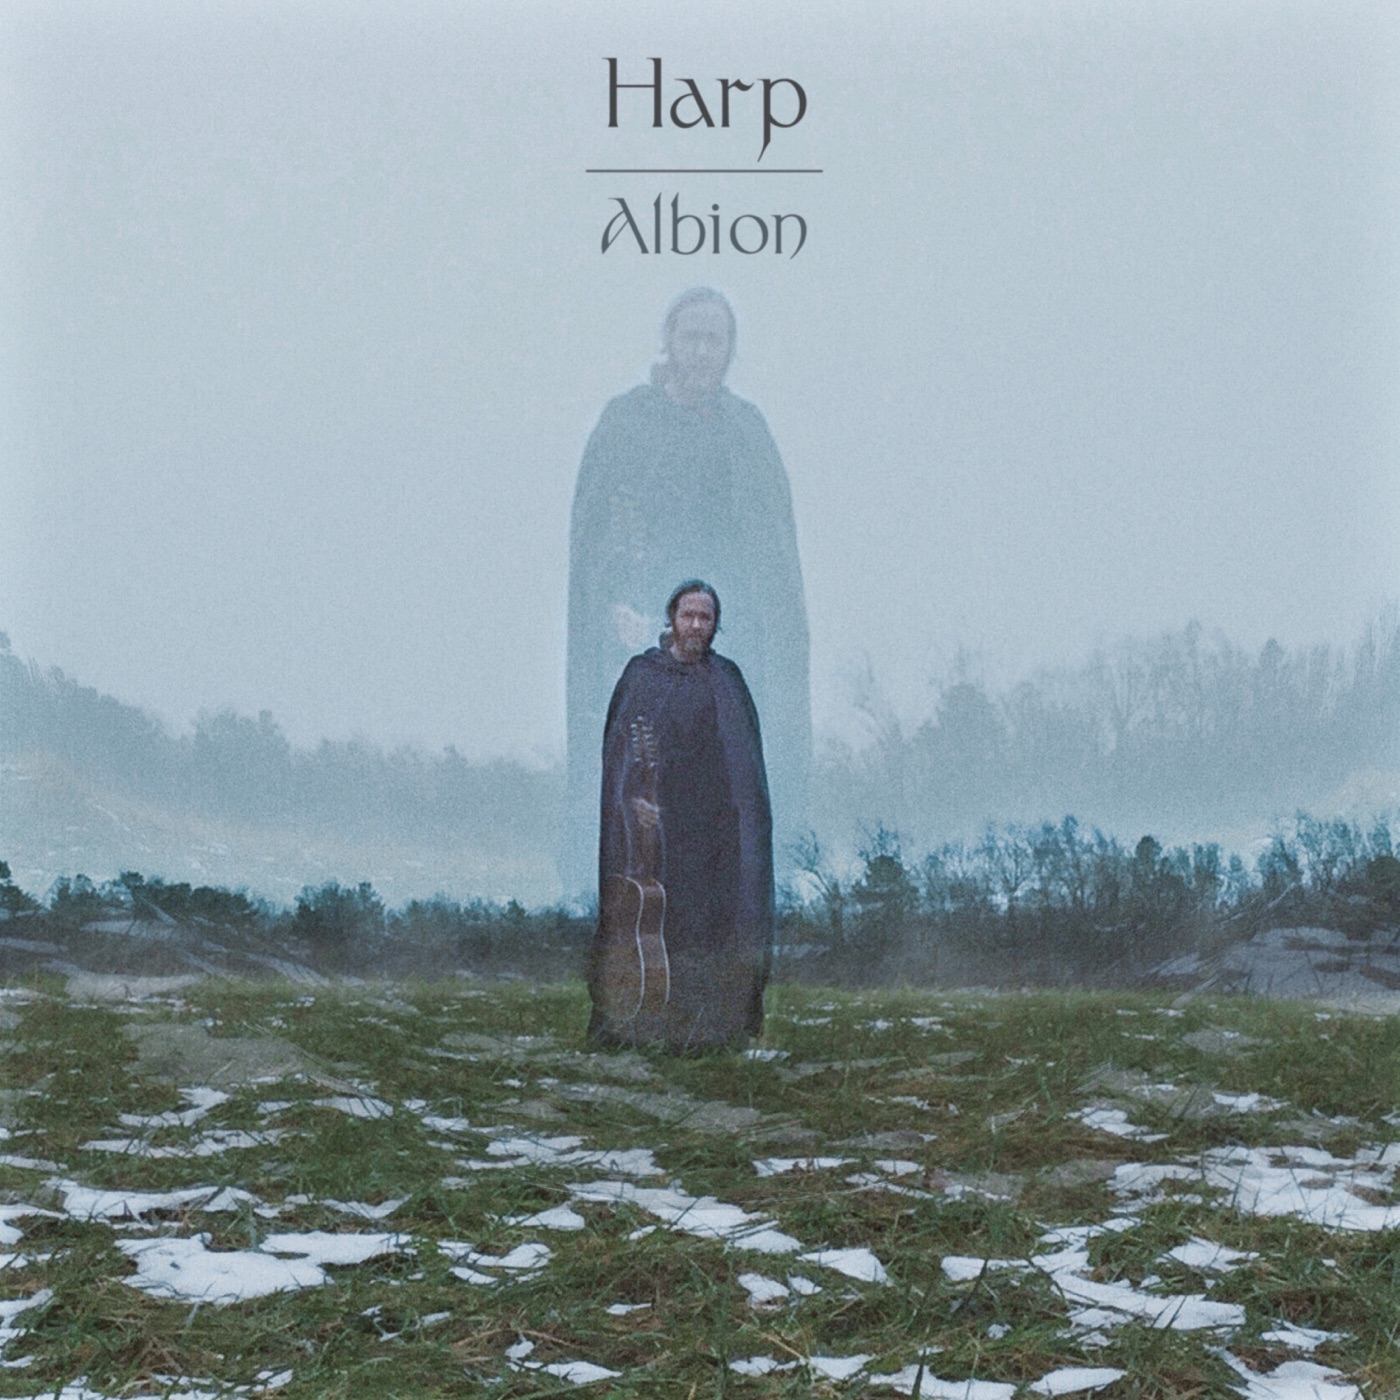 Albion by Harp